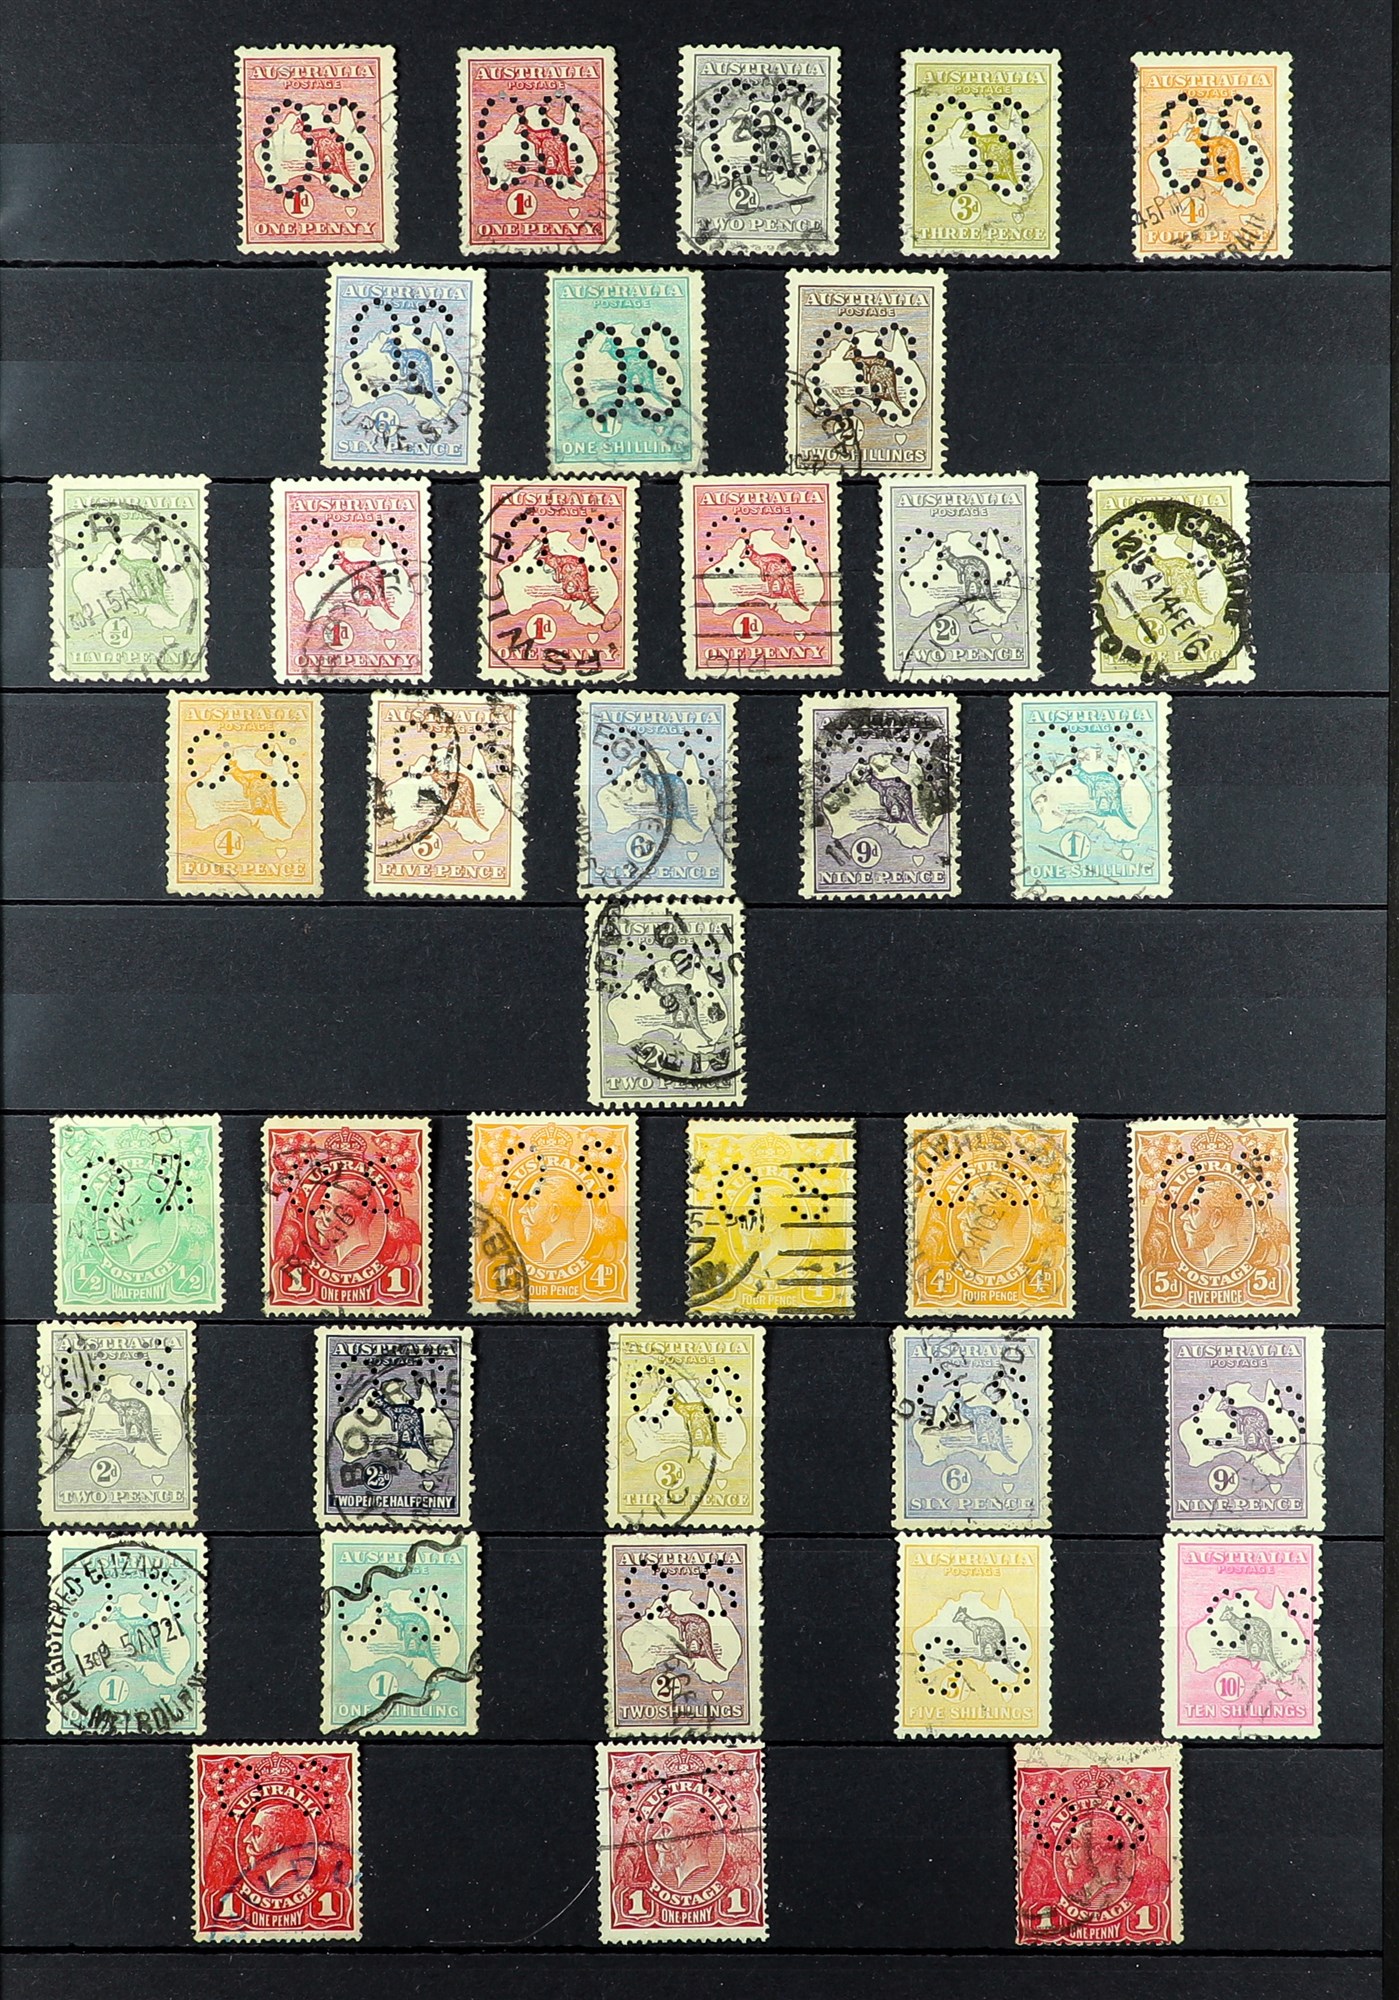 AUSTRALIA OFFICIALS 1913 - 1933 USED COLLECTION with many sets and higher values, on protective